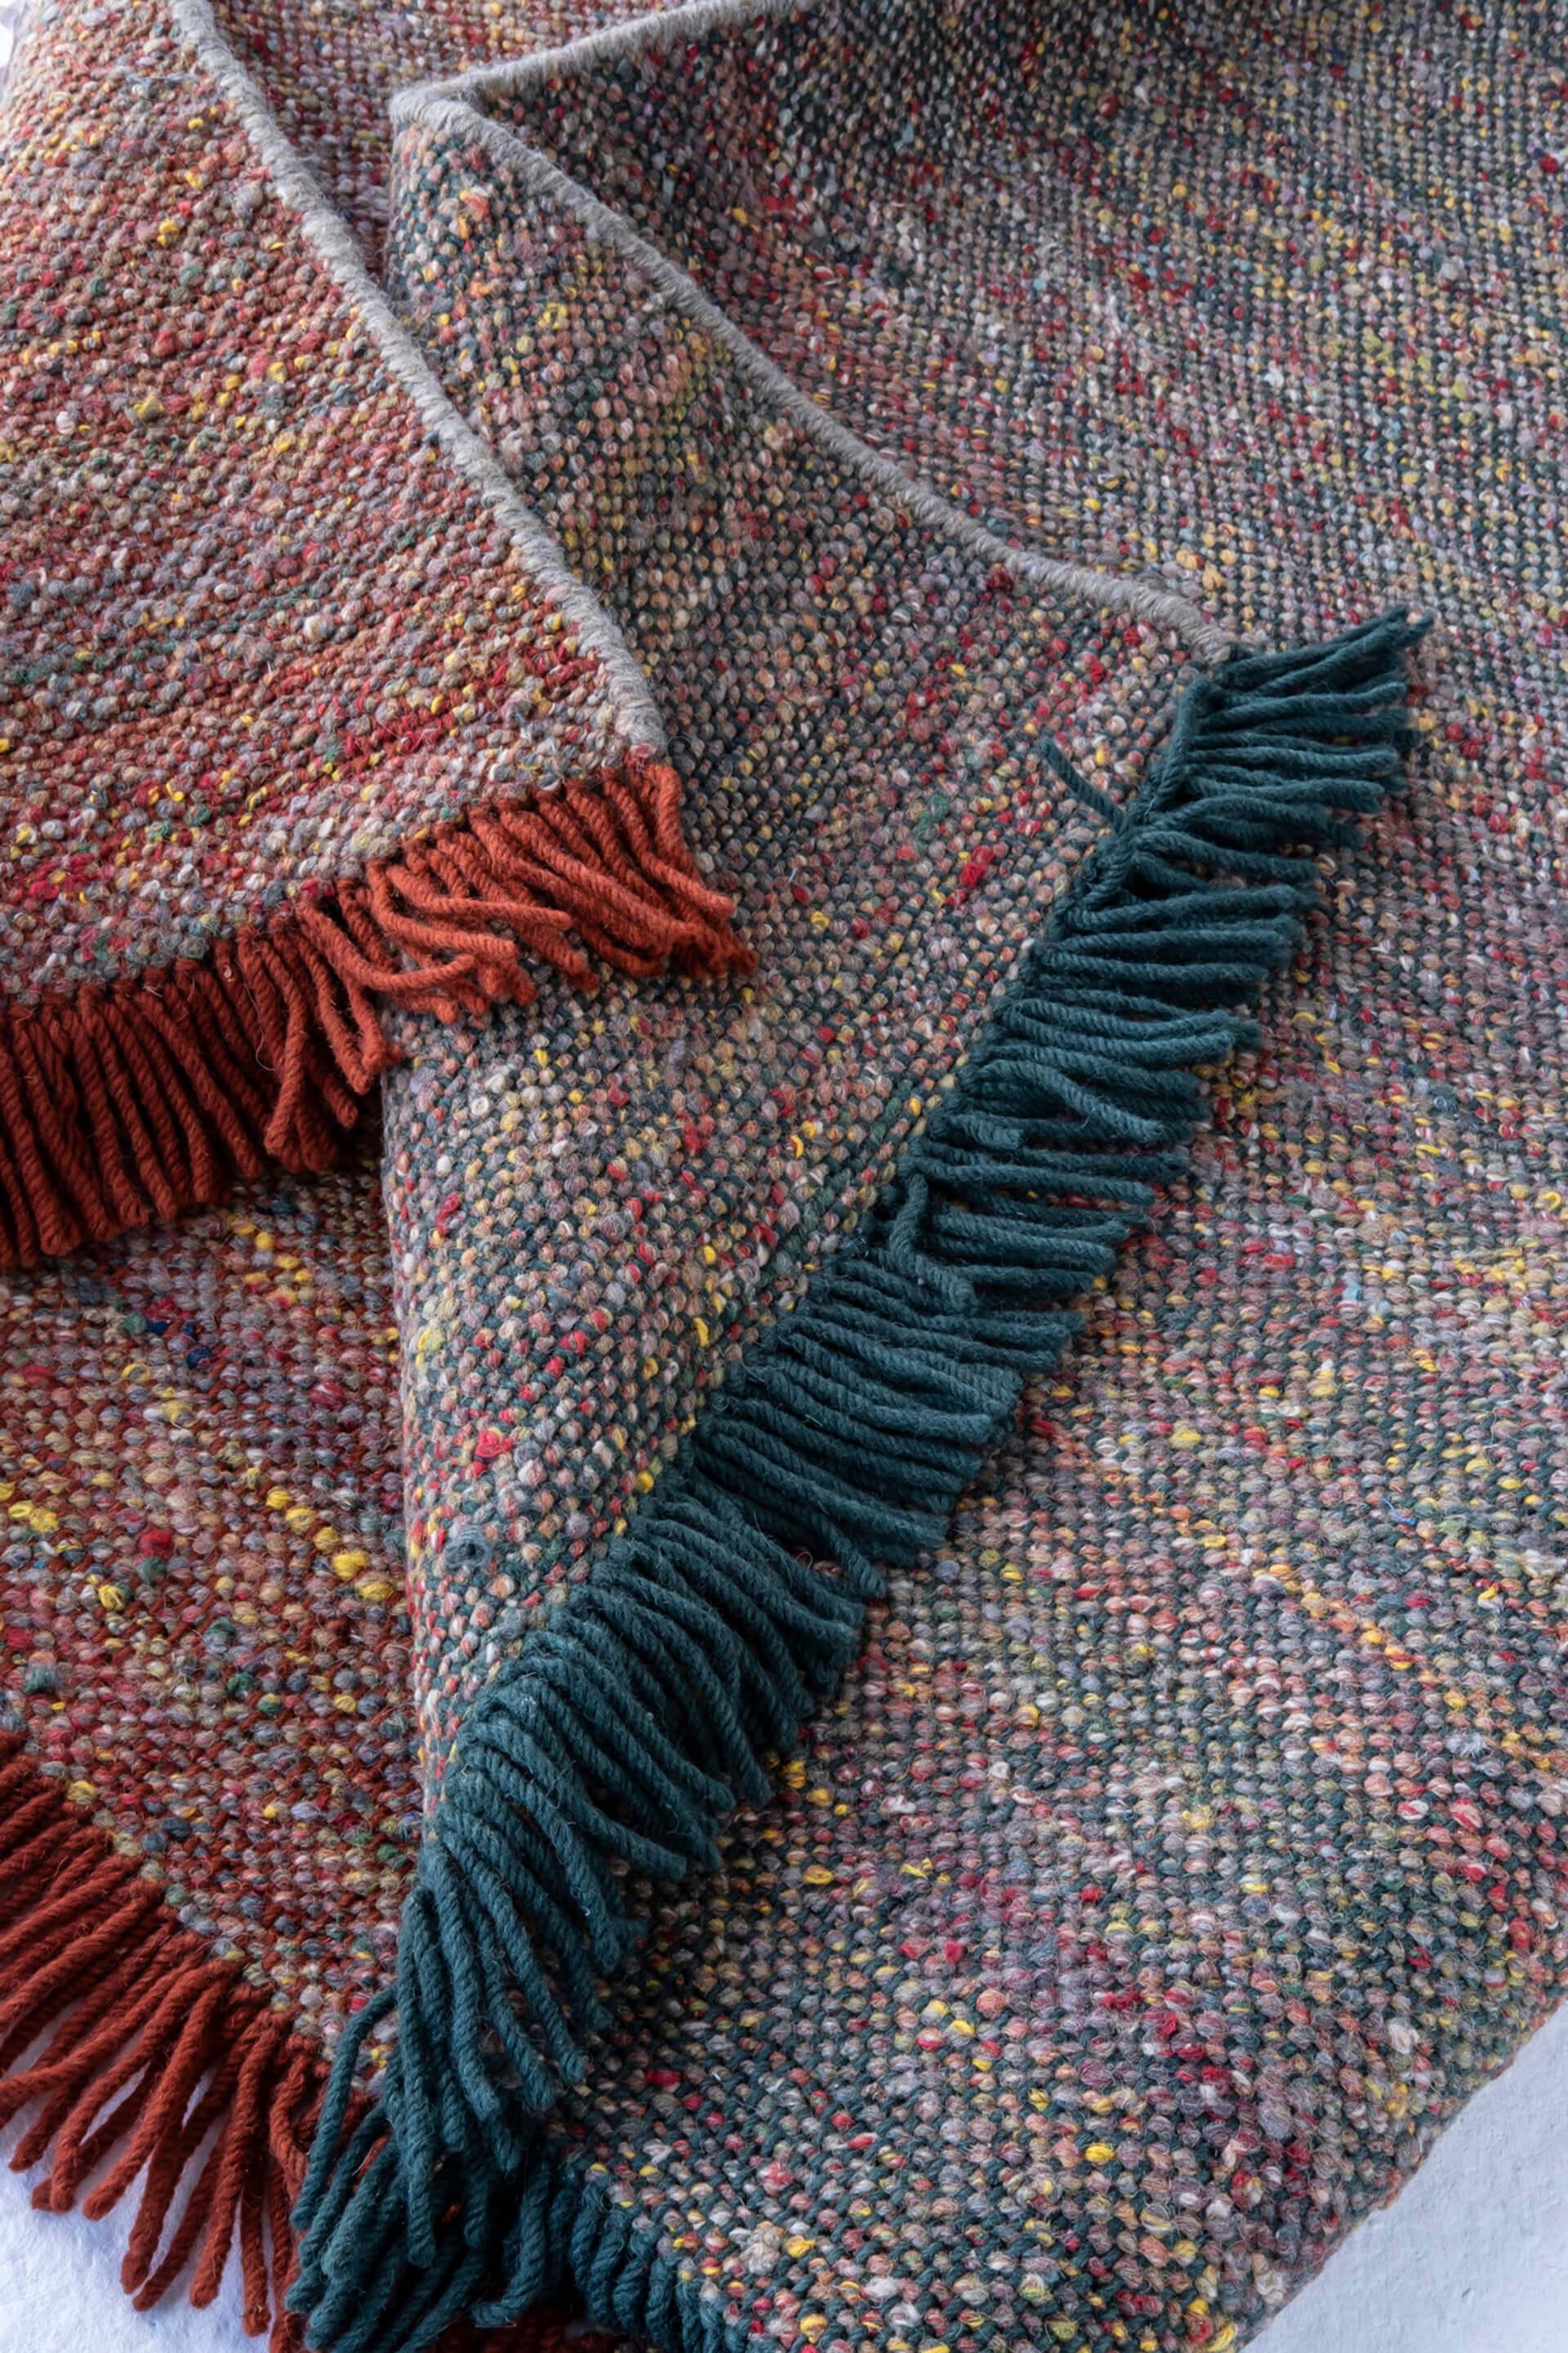 Re-Rug emerged from the decision to use the leftover wool accumulated by our suppliers. This initiative is the result of a long research process, the challenge of recovering these wools to create a new yarn suitable for weaving. Each Re-Rug uses